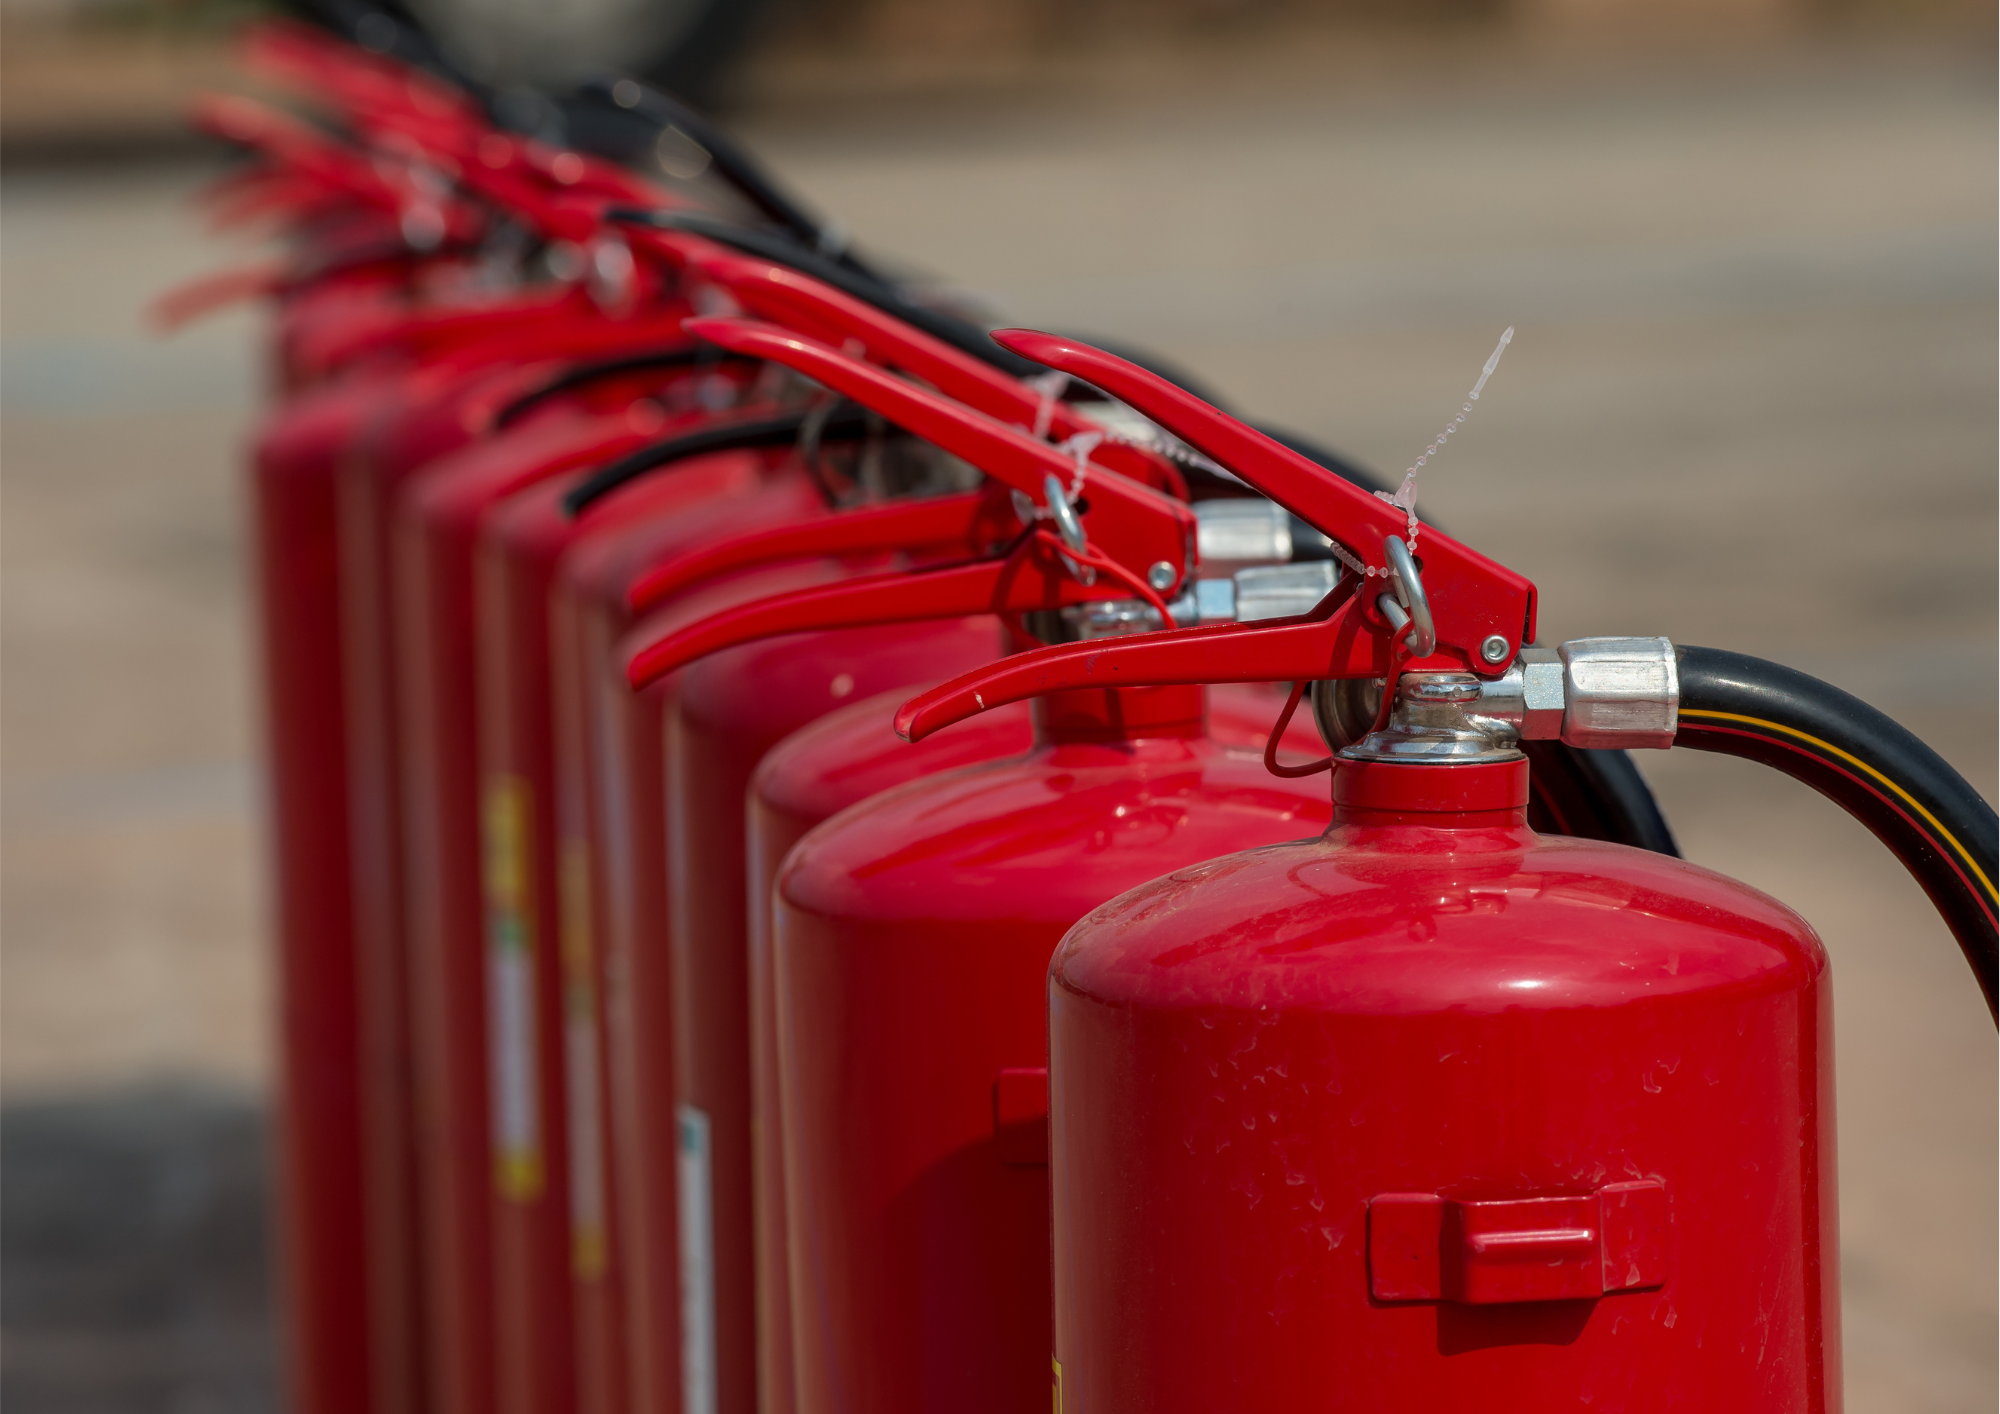 What Are The Current Installation And Maintenance Requirements for Fire Extinguishers?